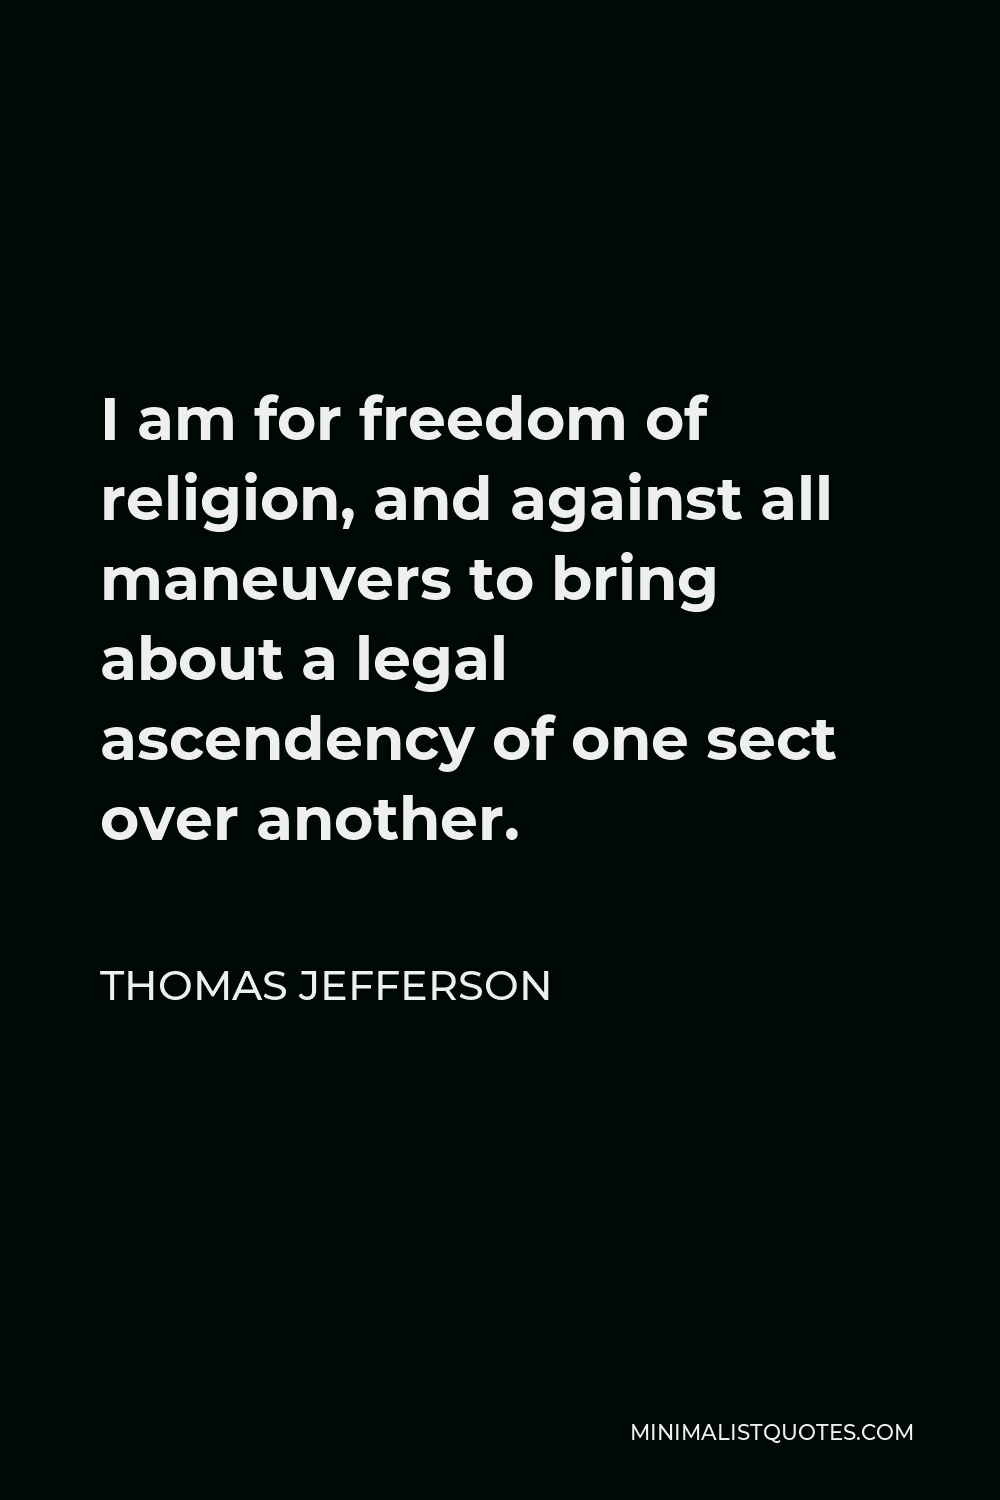 Thomas Jefferson Quote - I am for freedom of religion, and against all maneuvers to bring about a legal ascendency of one sect over another.